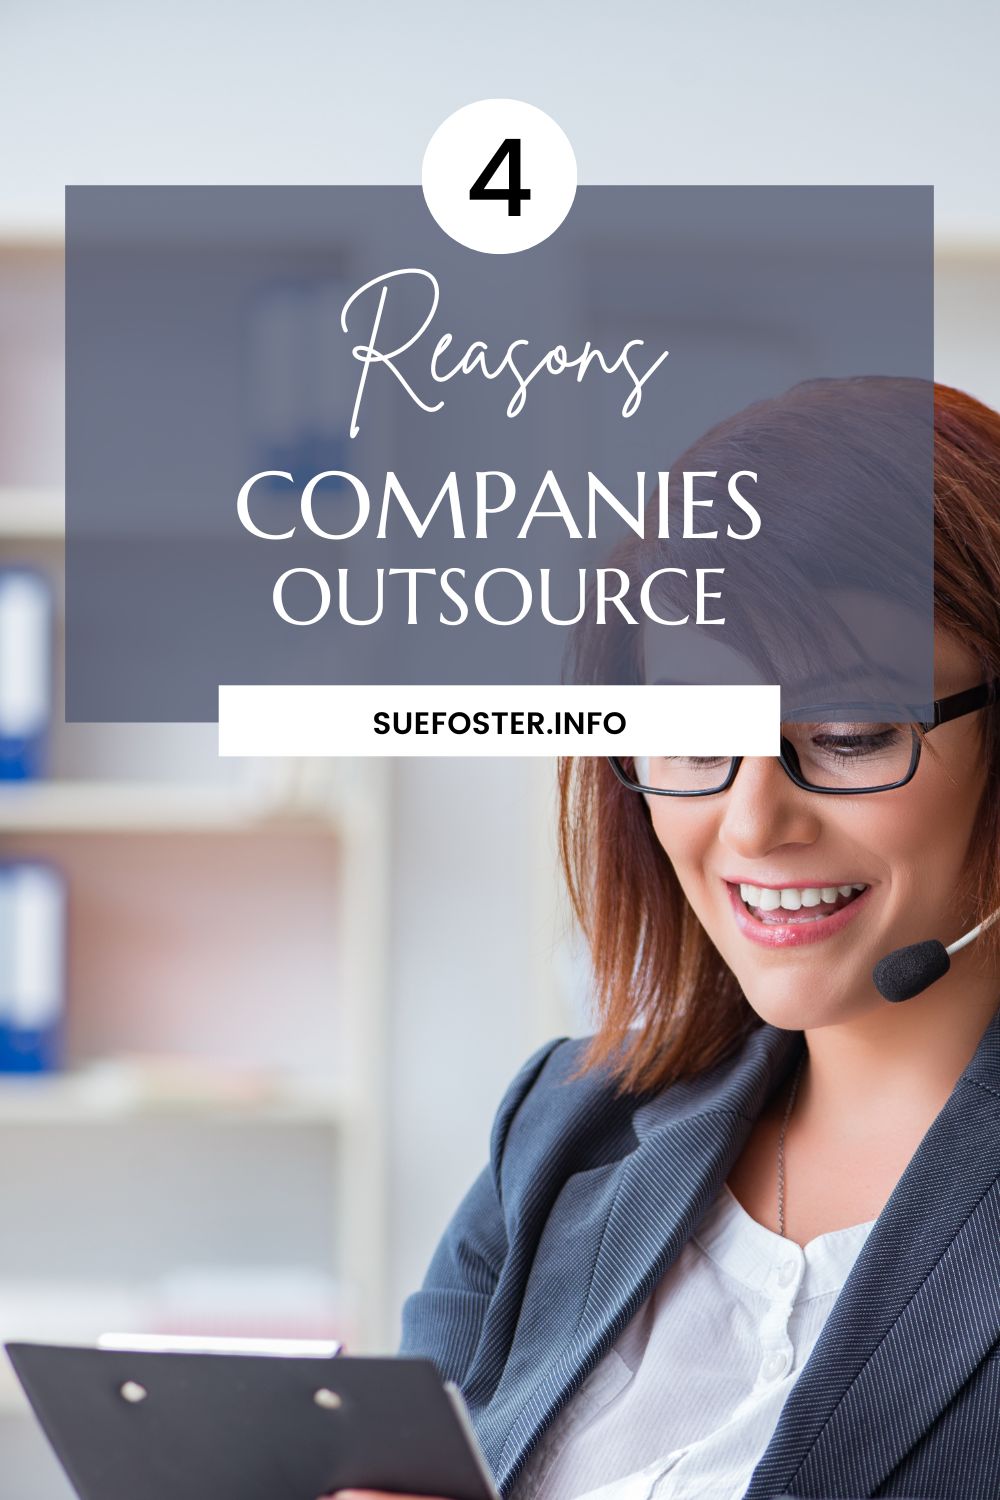 Here are four of the biggest reasons that companies choose to outsource